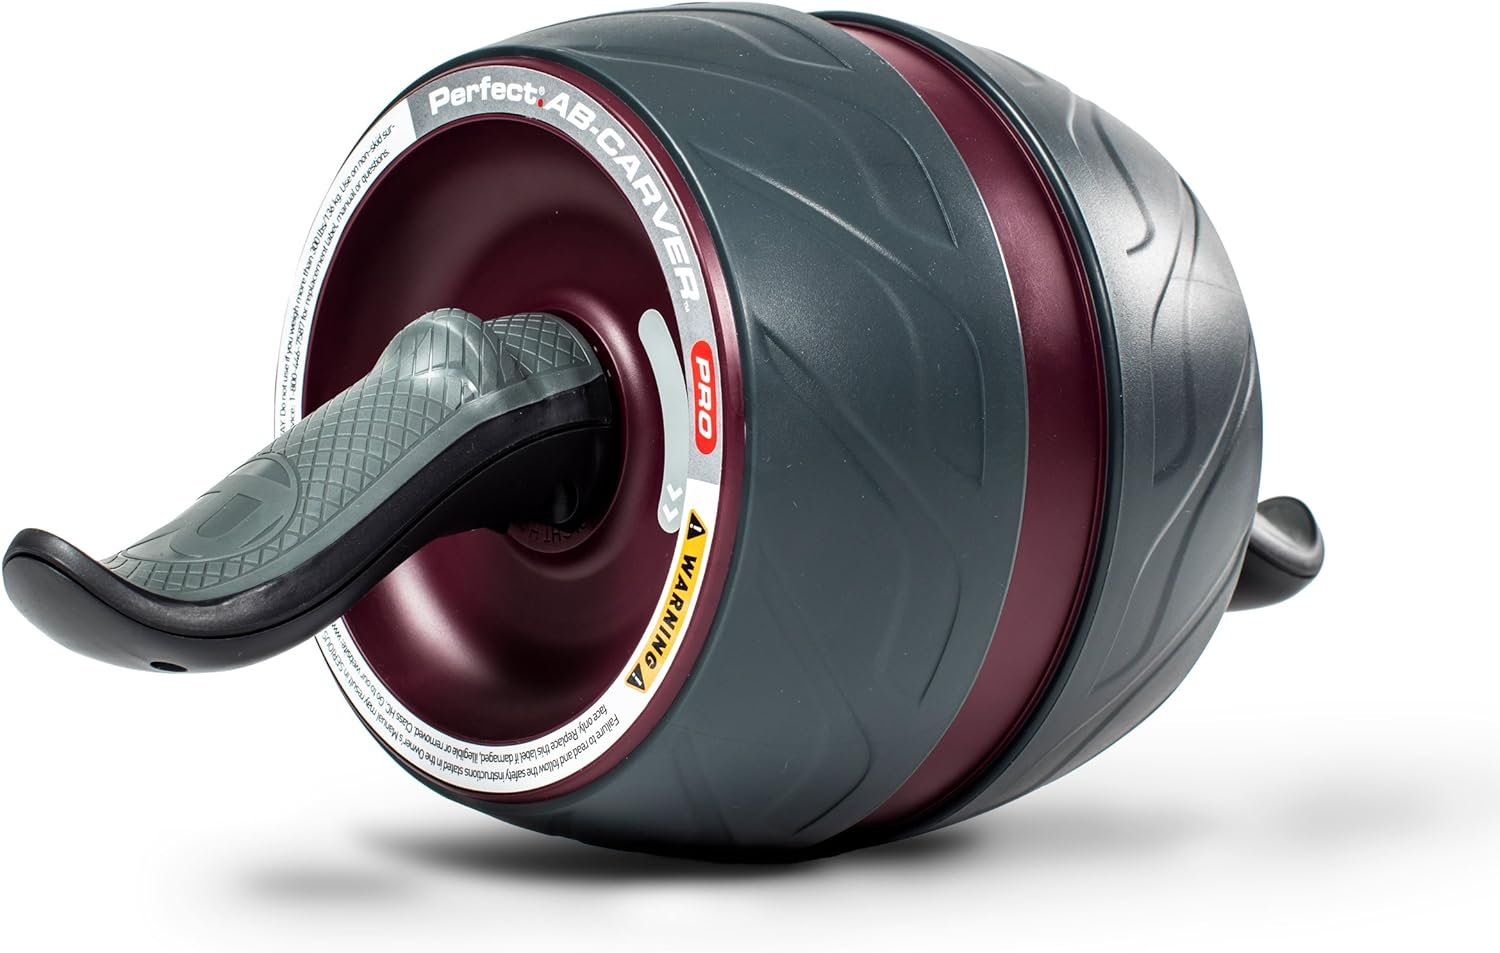 Perfect Fitness Ab Carver Pro Roller Wheel With Built In Spring Resistance, At Home Core Workout Equipment, Red